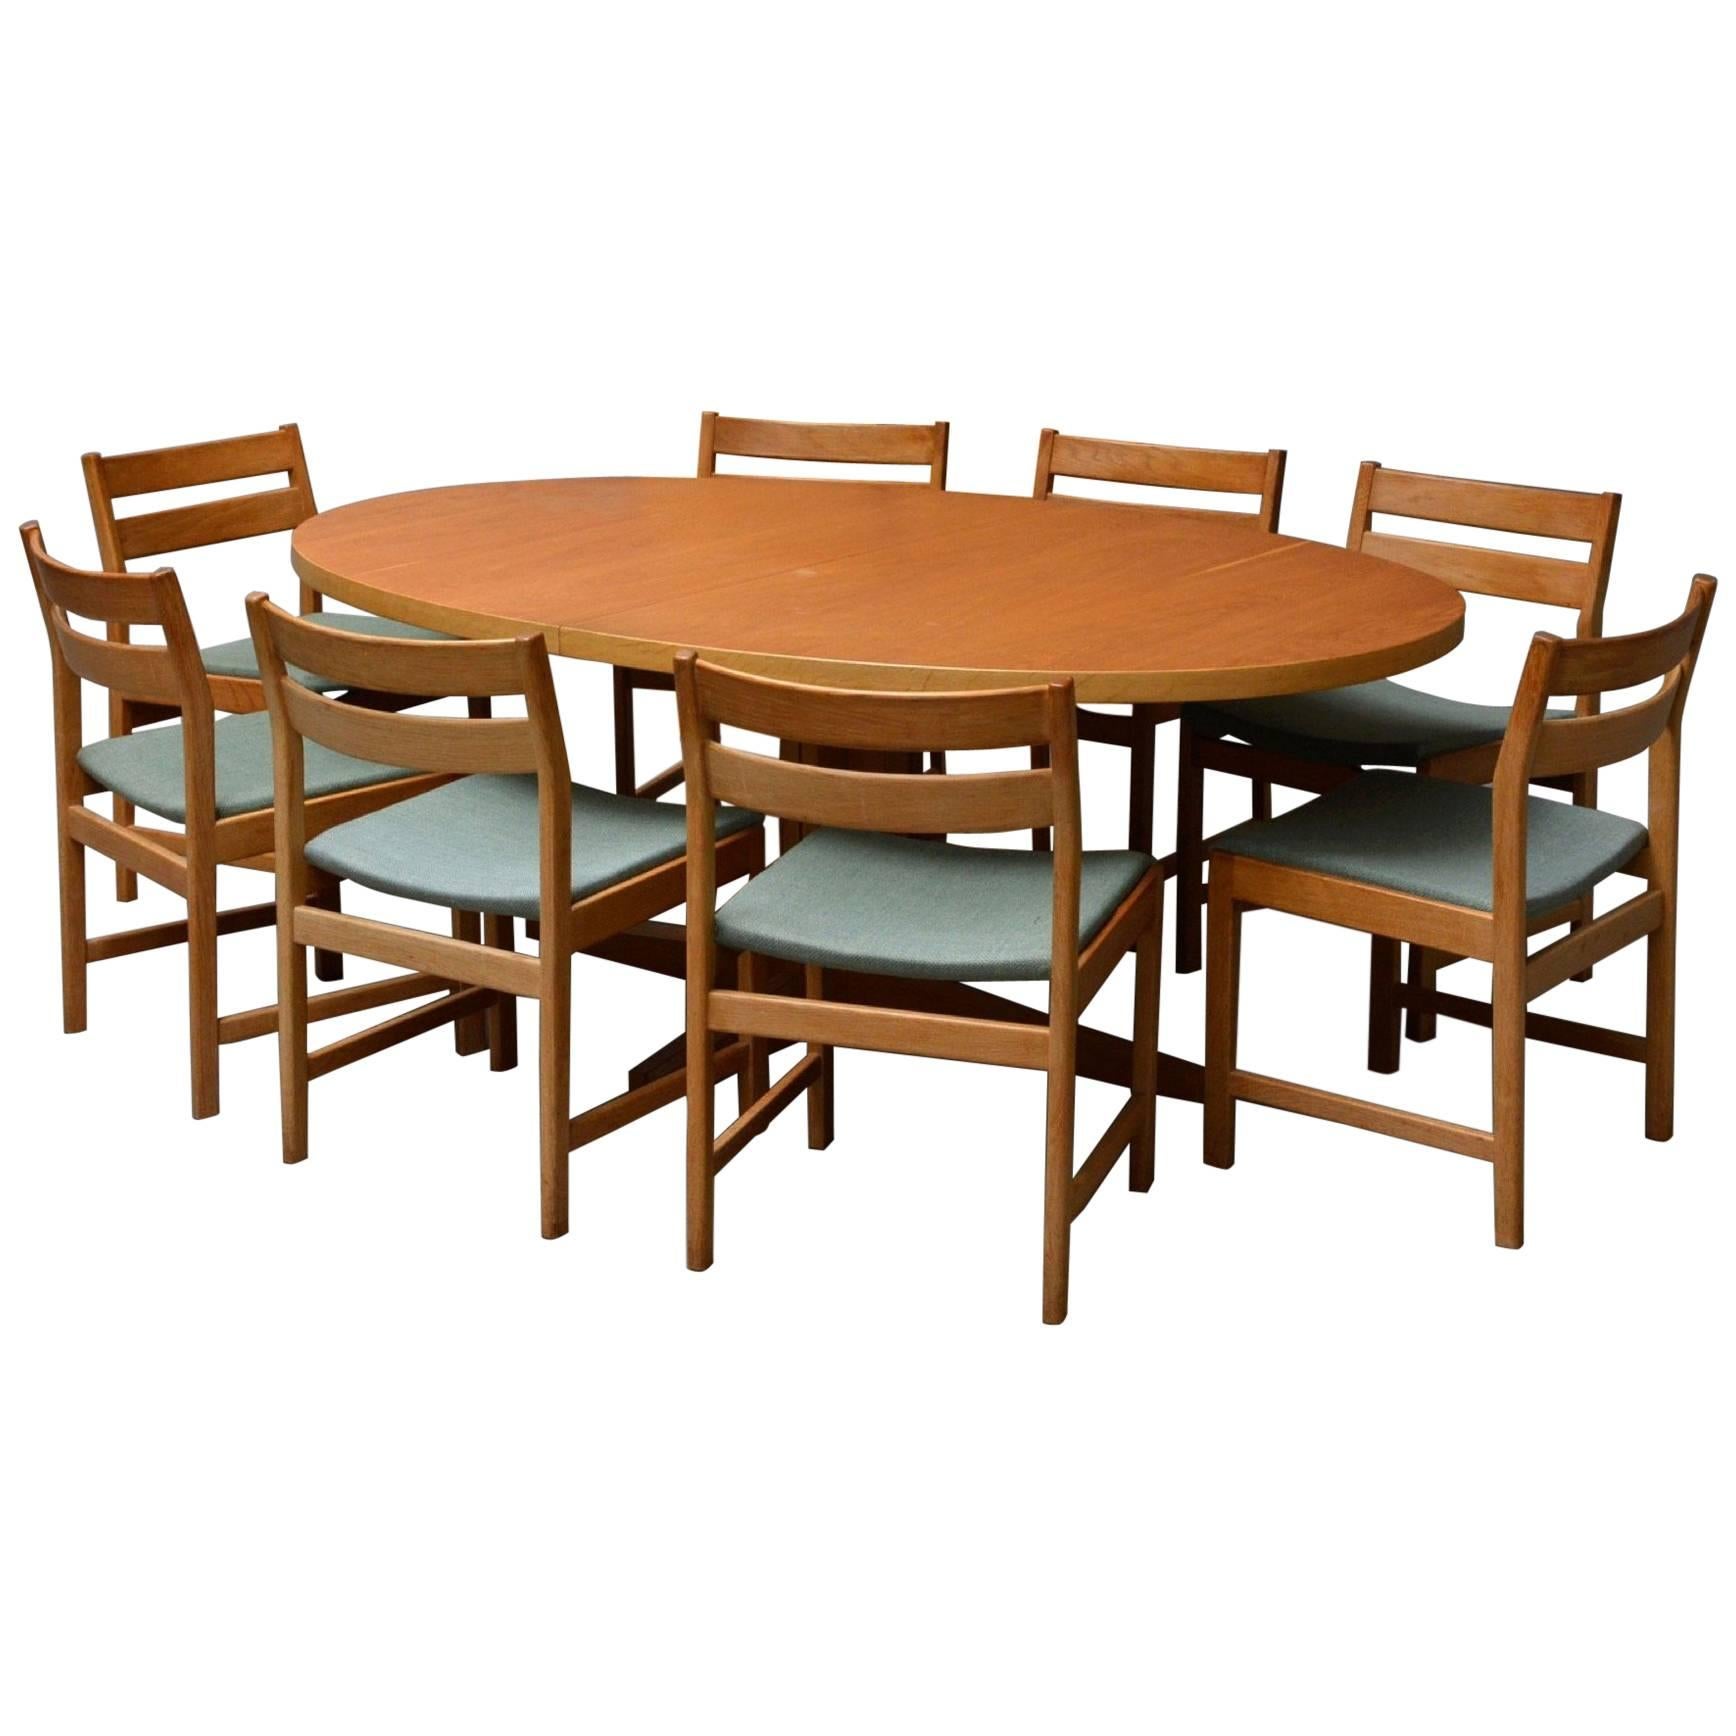 Eight Chairs with Matching Table by Kurt Stervig for KP Furniture